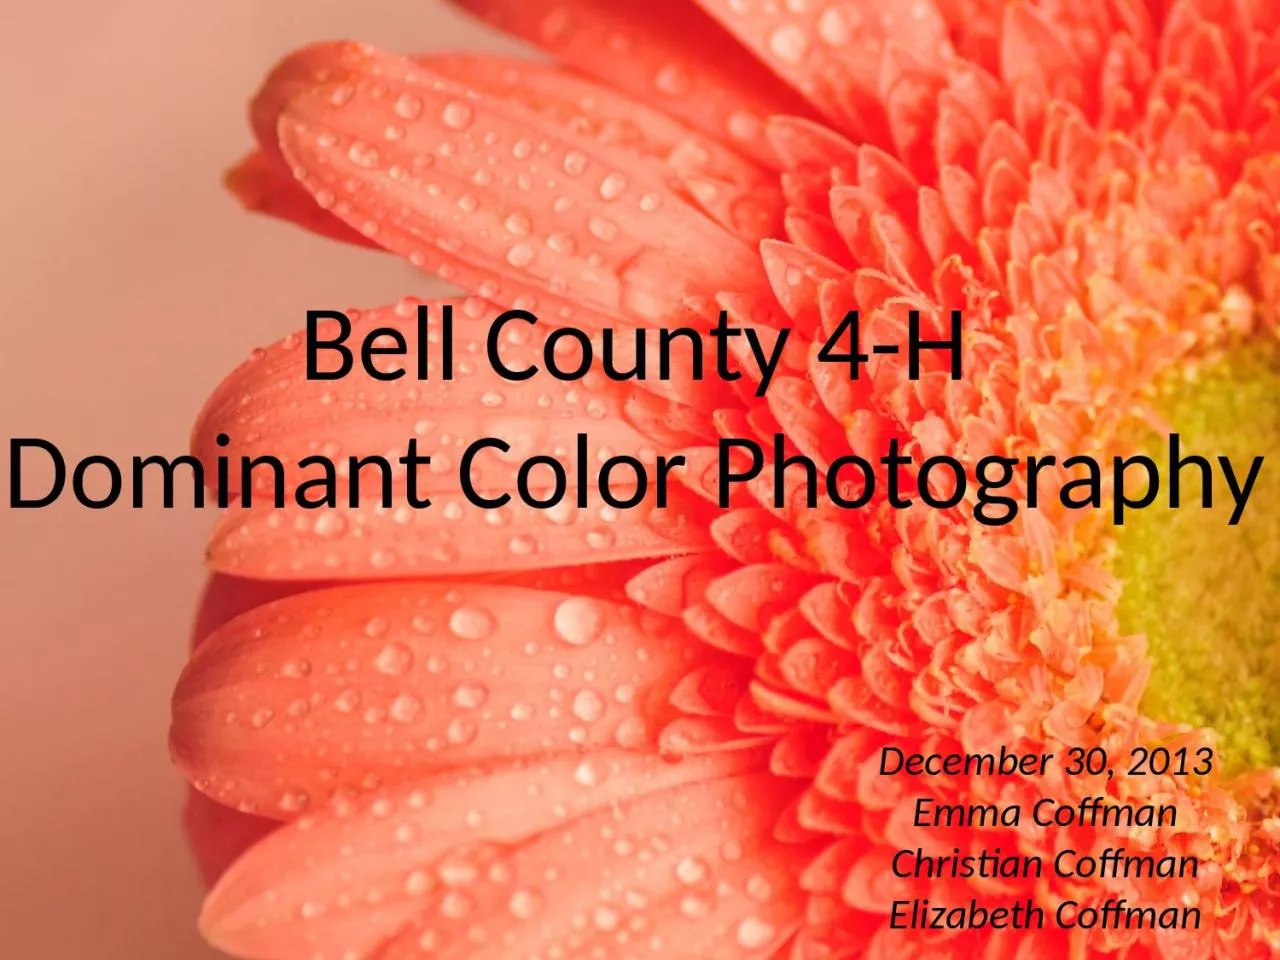 Bell County 4-H Dominant Color Photography